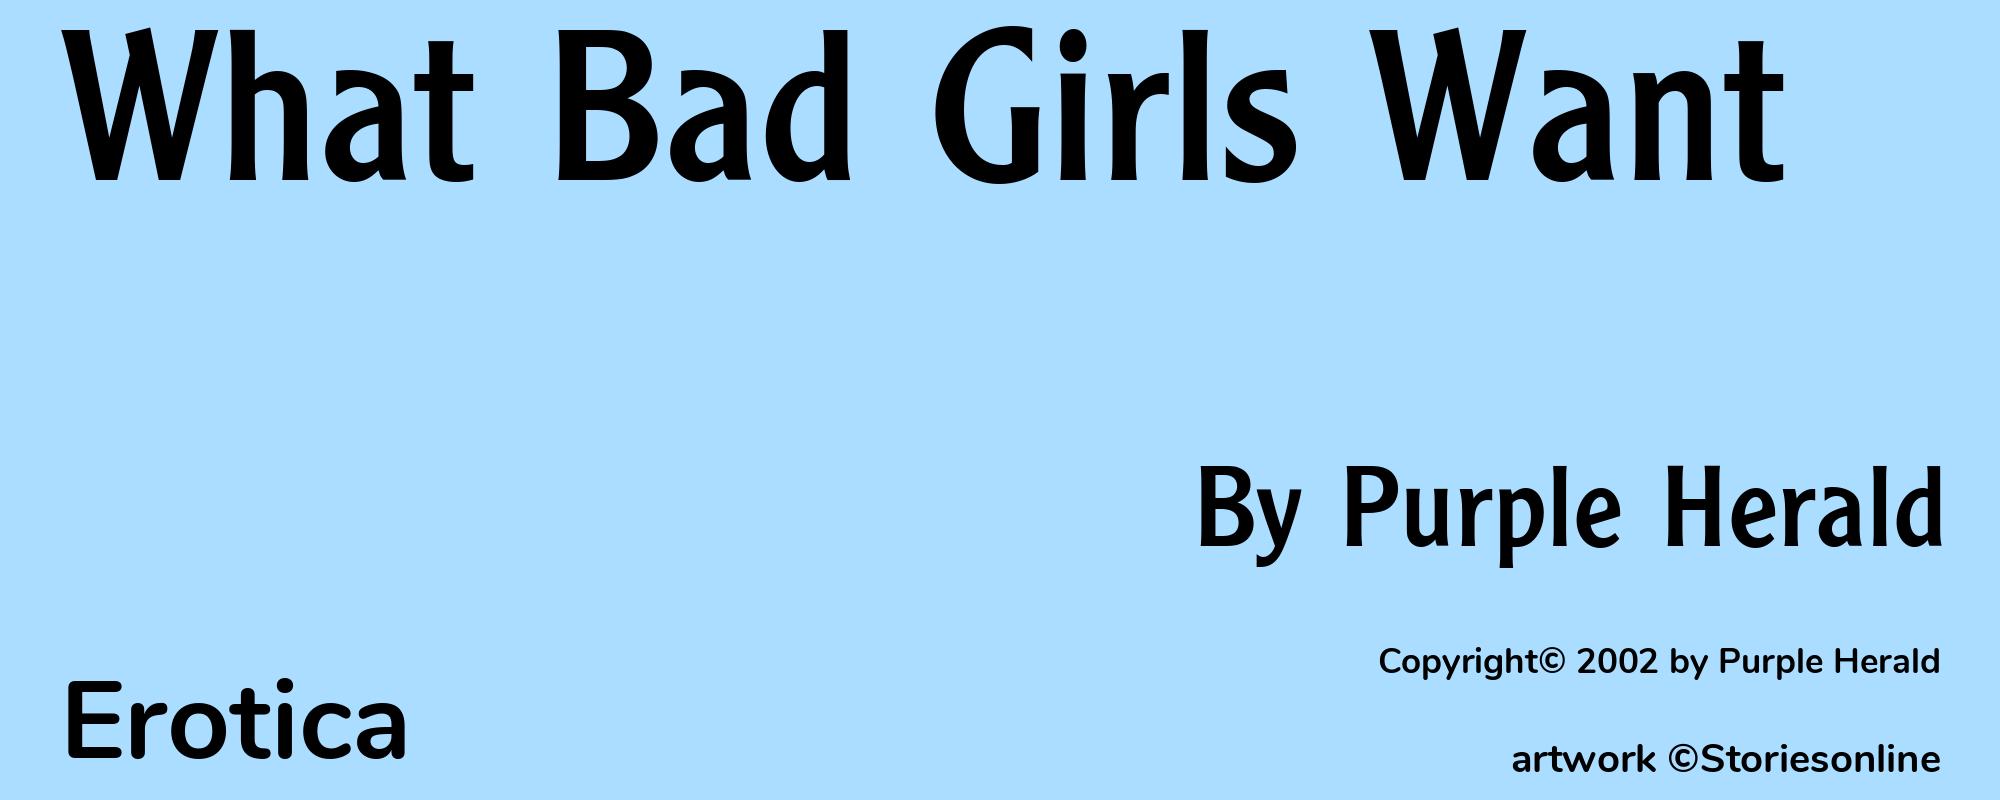 What Bad Girls Want - Cover